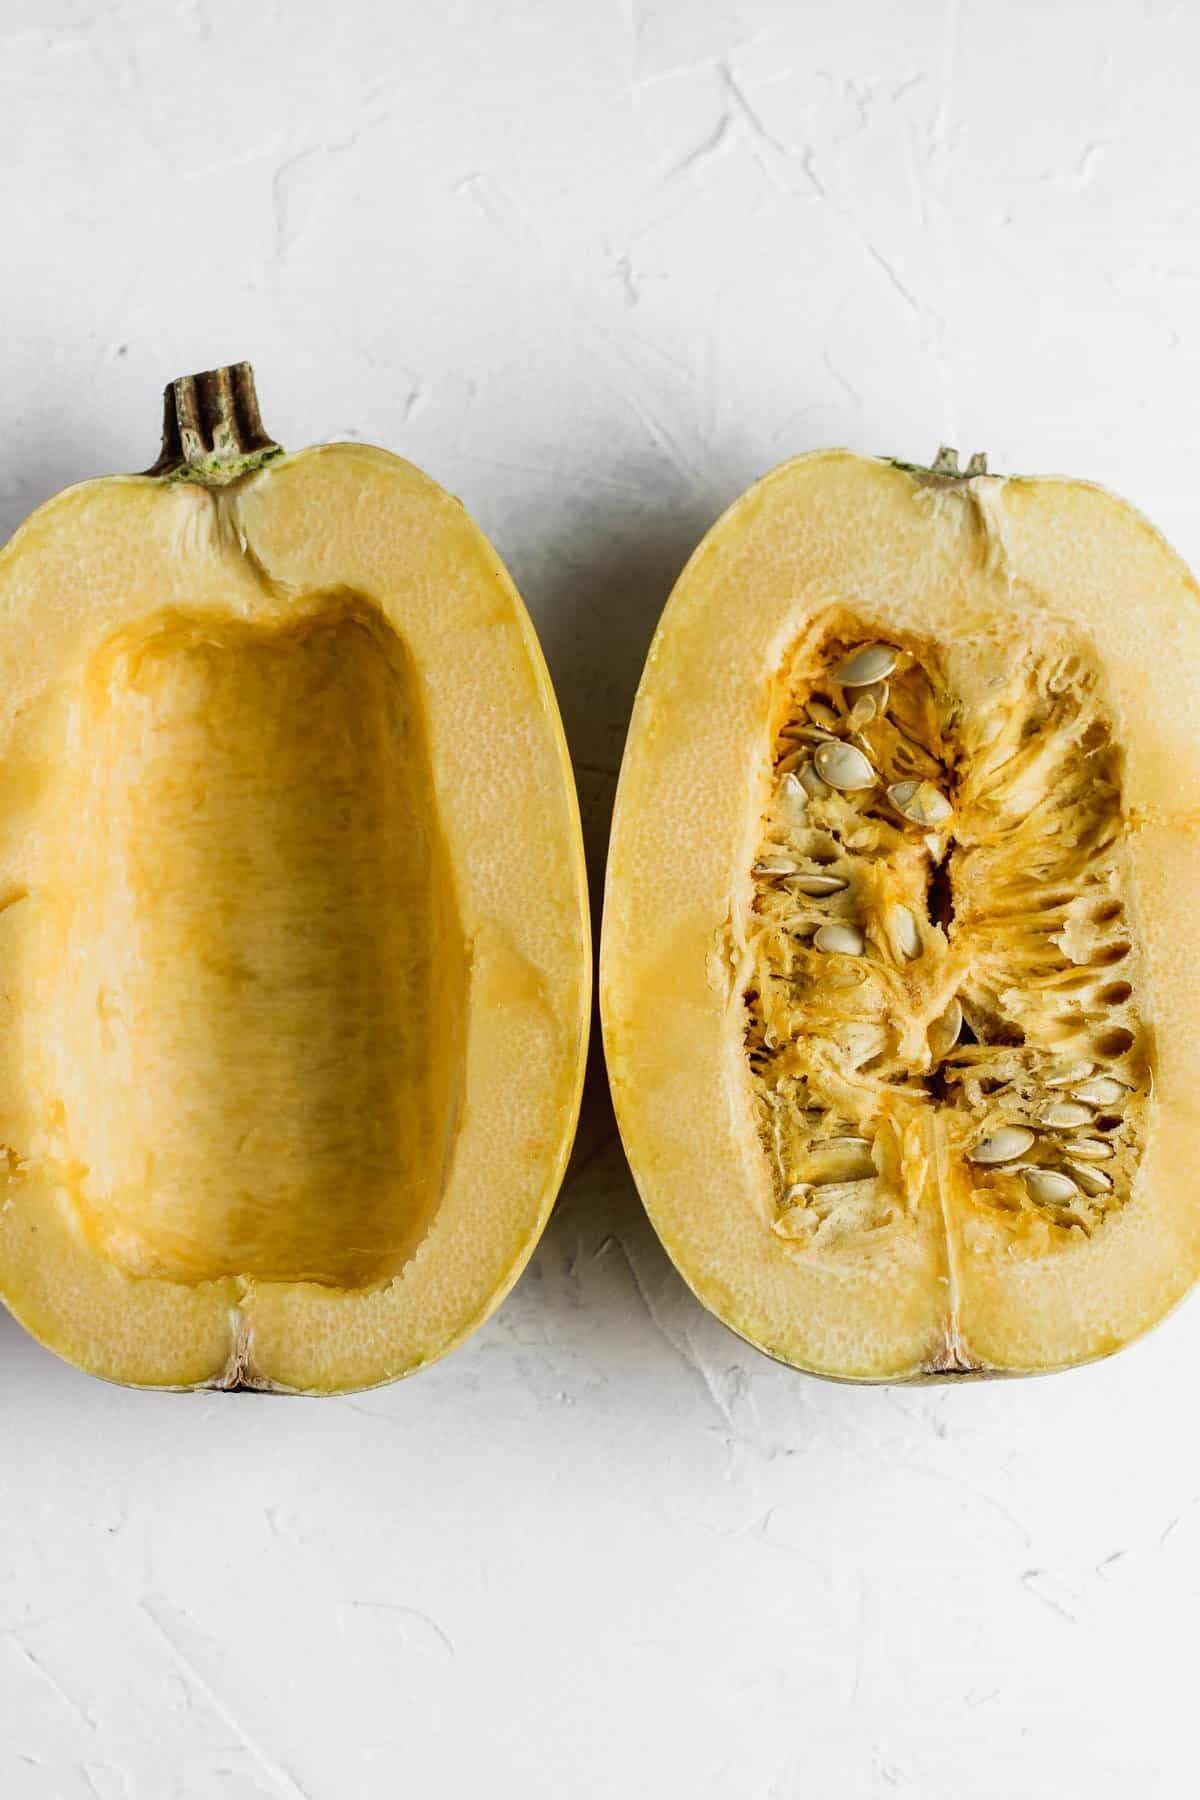 Halved uncooked spaghetti squash with seeds and inners still intact.